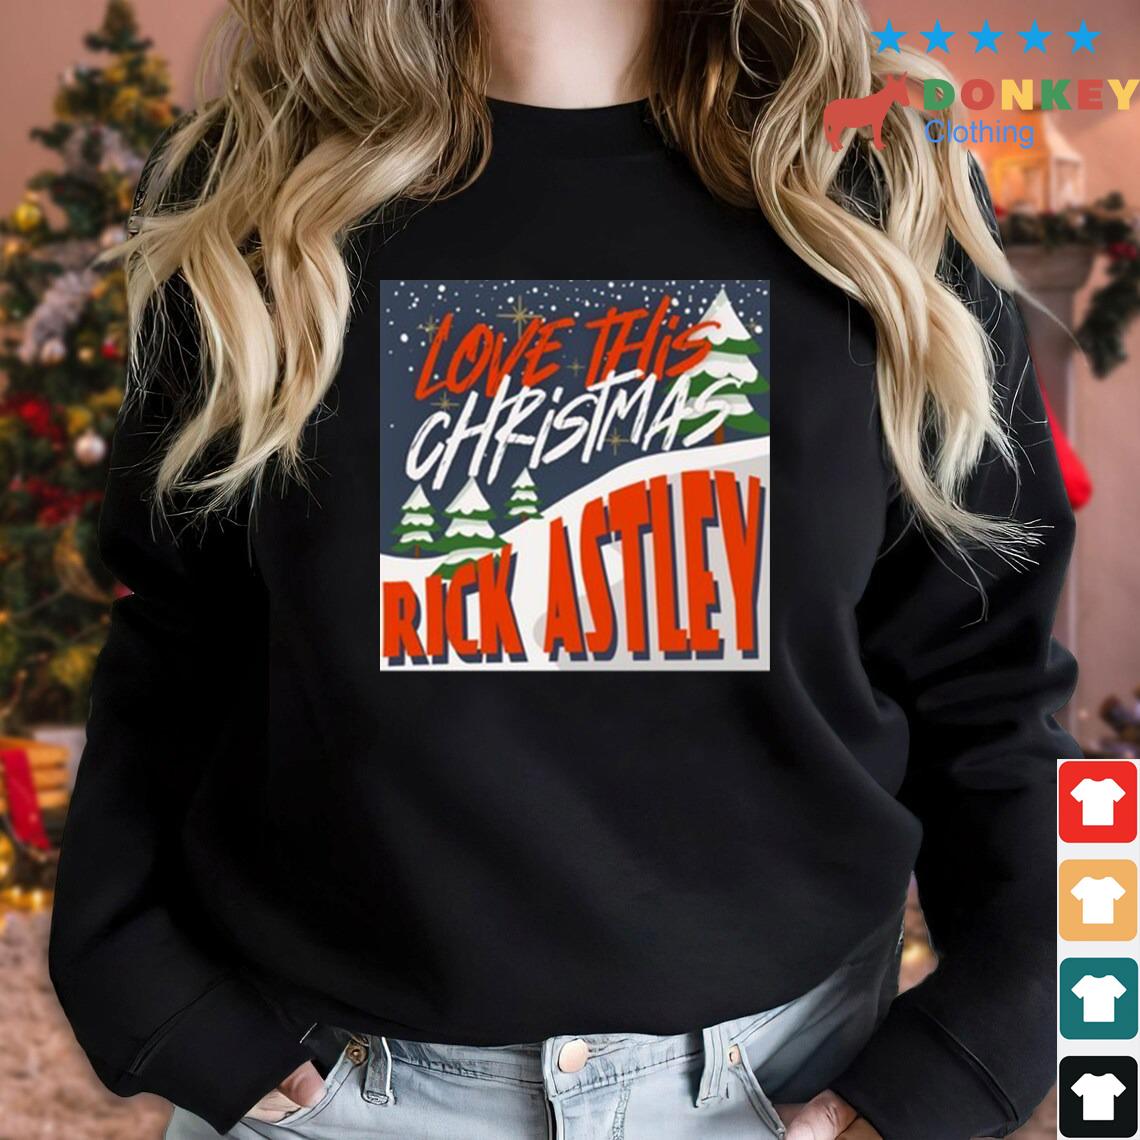 Rick Astley Love This Christmas Sweater